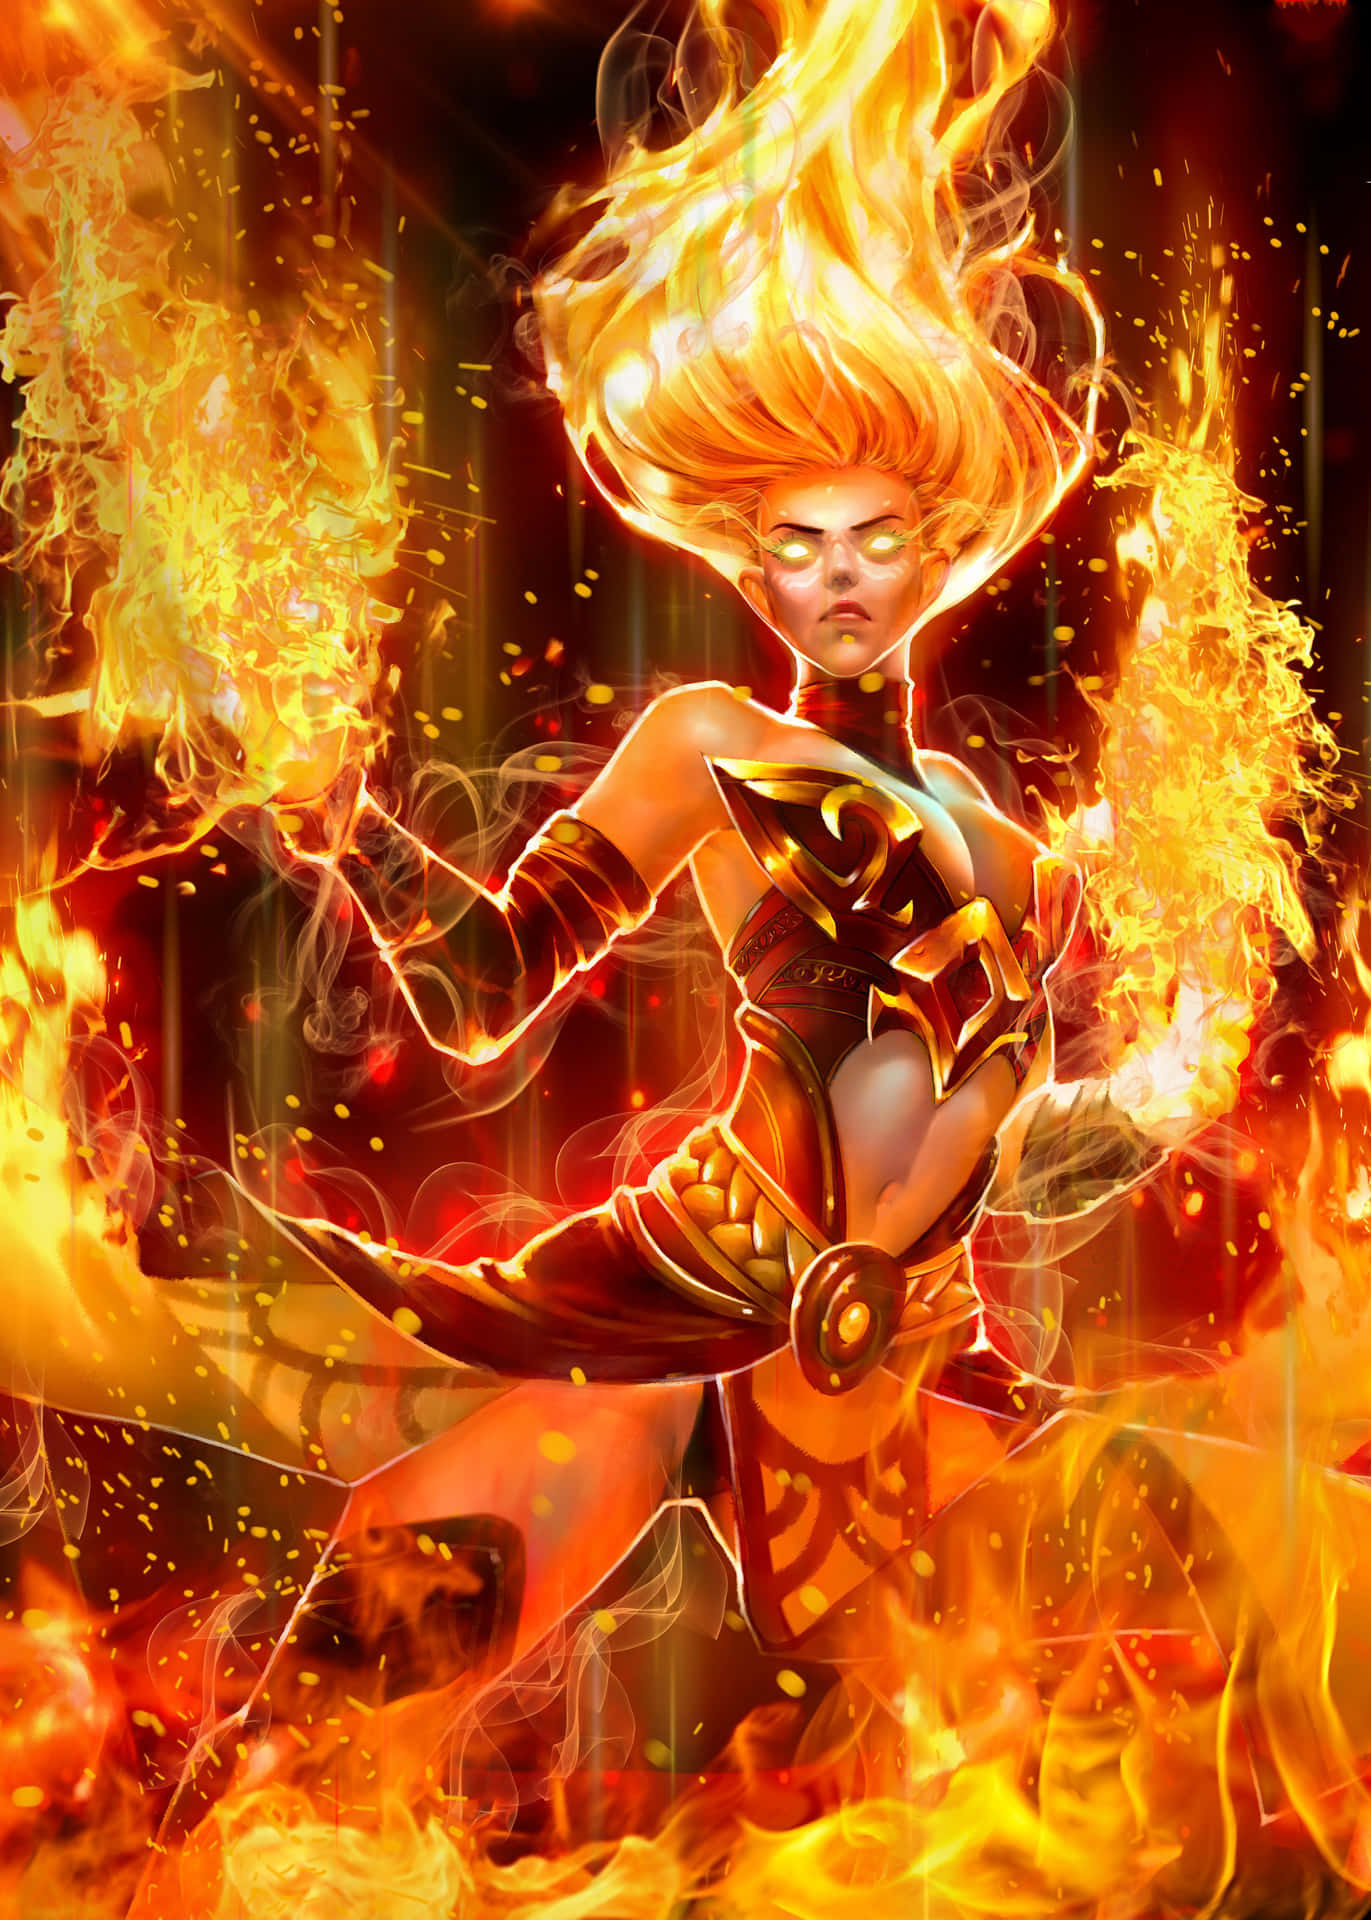 Lina, the fiery mage of Dota 2, unleashes her fiery spells on the battlefield. Wallpaper